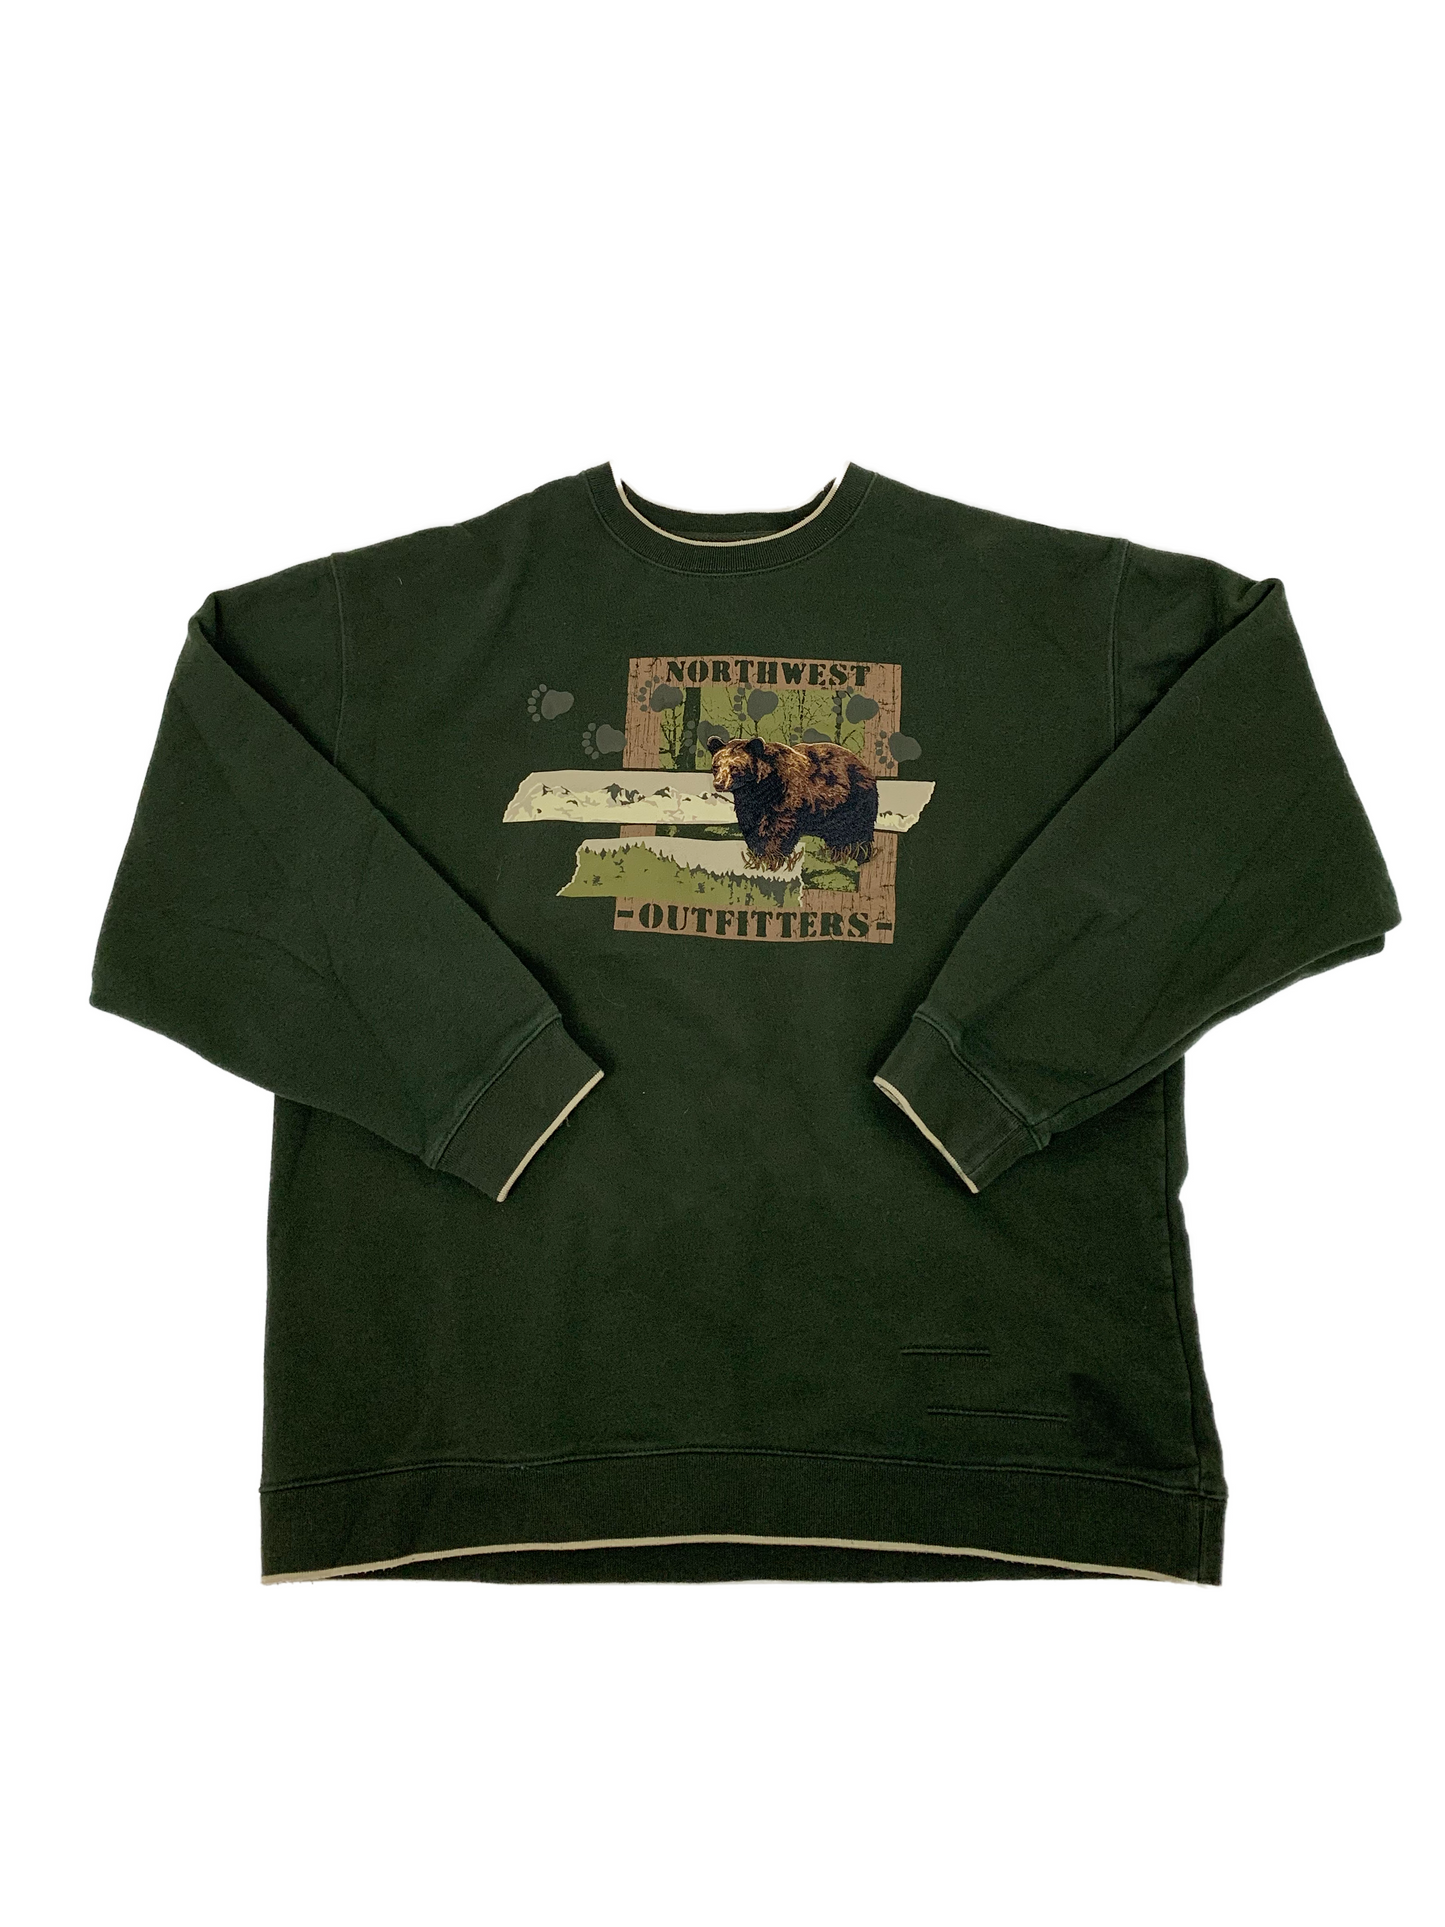 Northwest Outfitters Crewneck